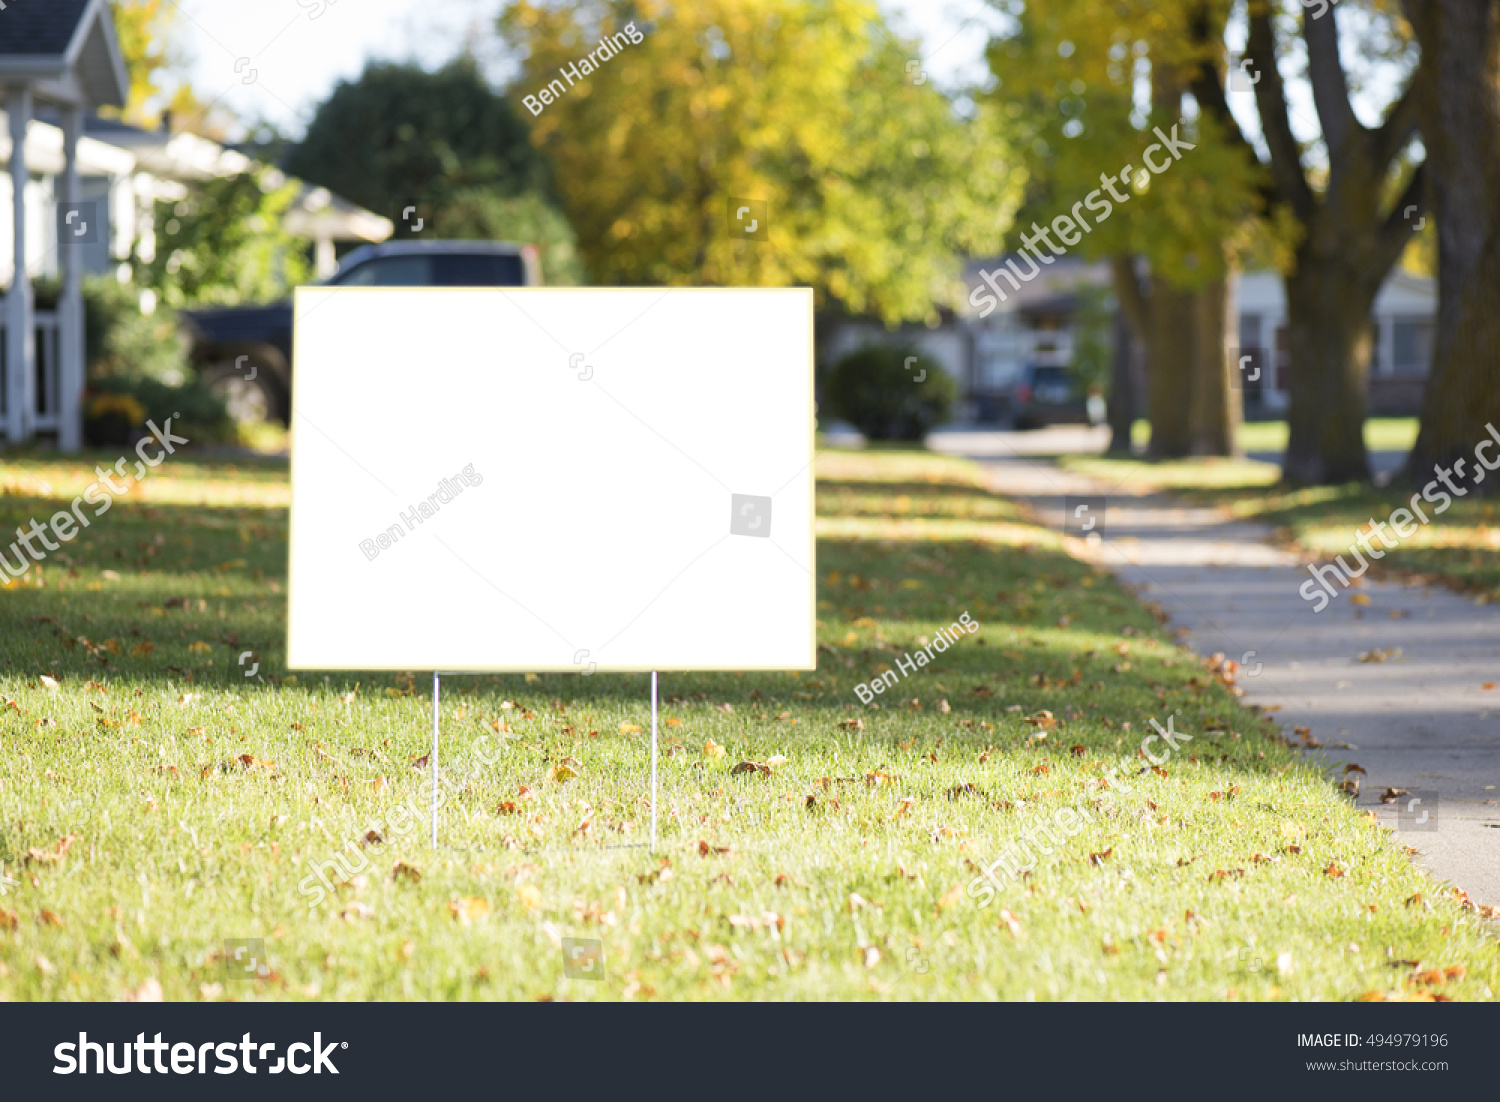 blank yard sign during sunny autumn weather #494979196